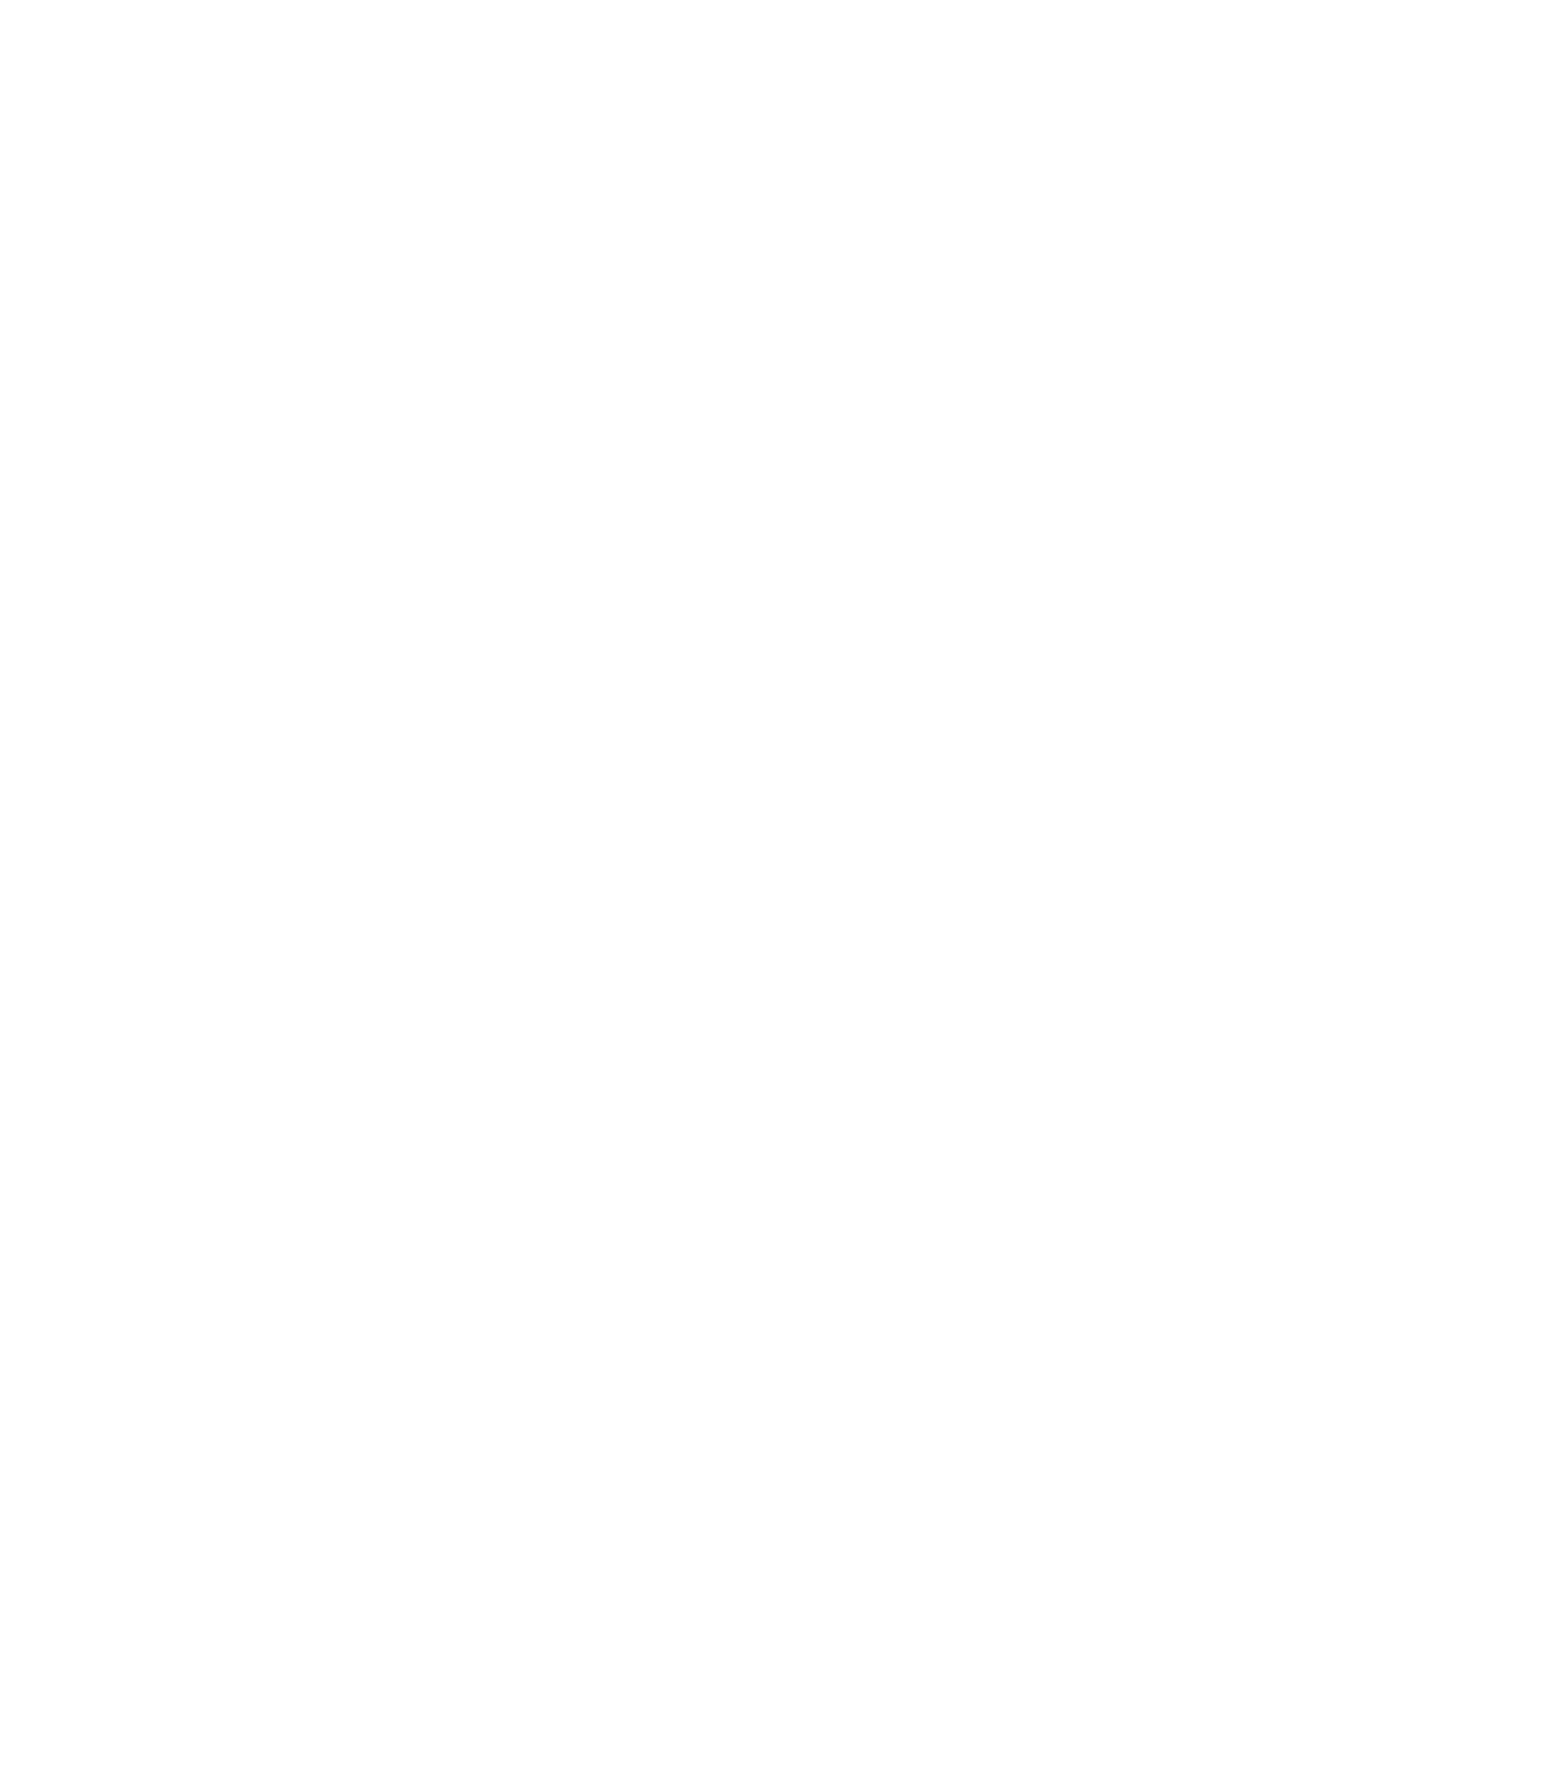 Altered sketch of an alphabet chart uploaded to Wikimedia by ArwinJ demonstrating the connections between letters in the Roman, Greek, Phoenician, Hebrew, and Arabic alphabets. In my version, the chart begins to disintegrate partway through as the letters fall down upon each other in a jumble.